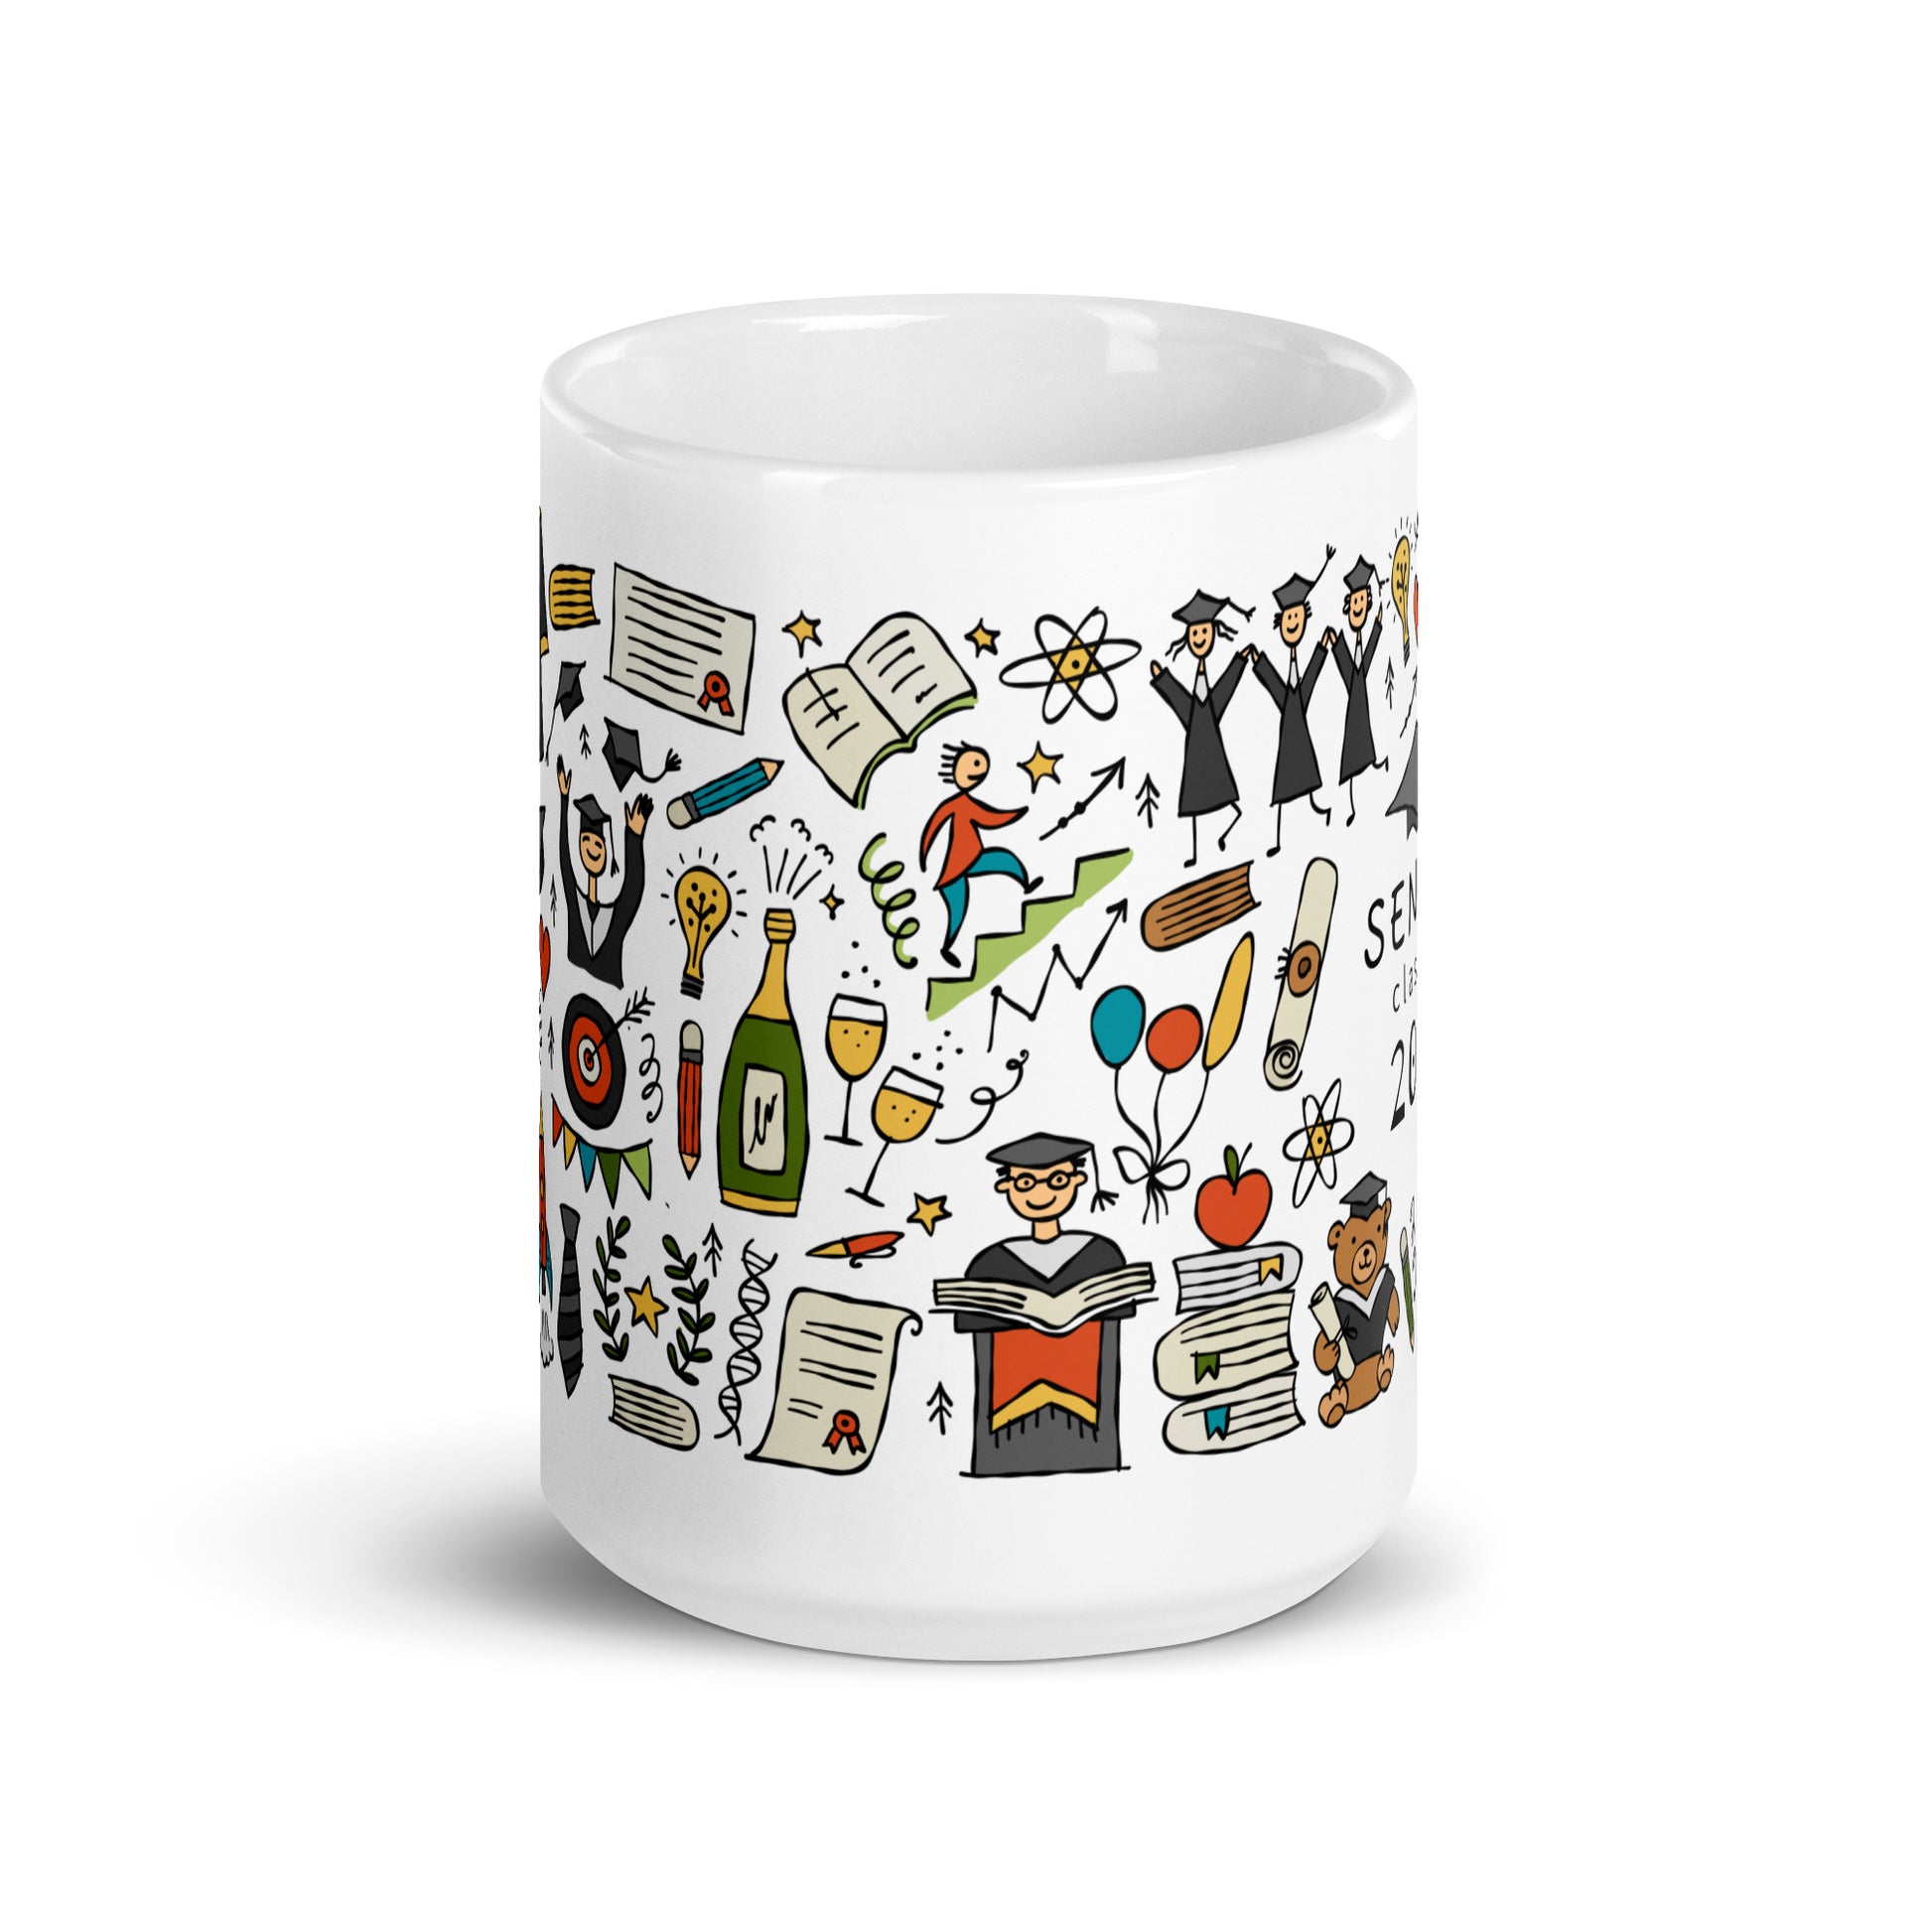 Personalised graduation 2023 mug 15oz with funny designer print featuring graduates in hats and mantles, school books and holiday motifs and graduation teddy bear